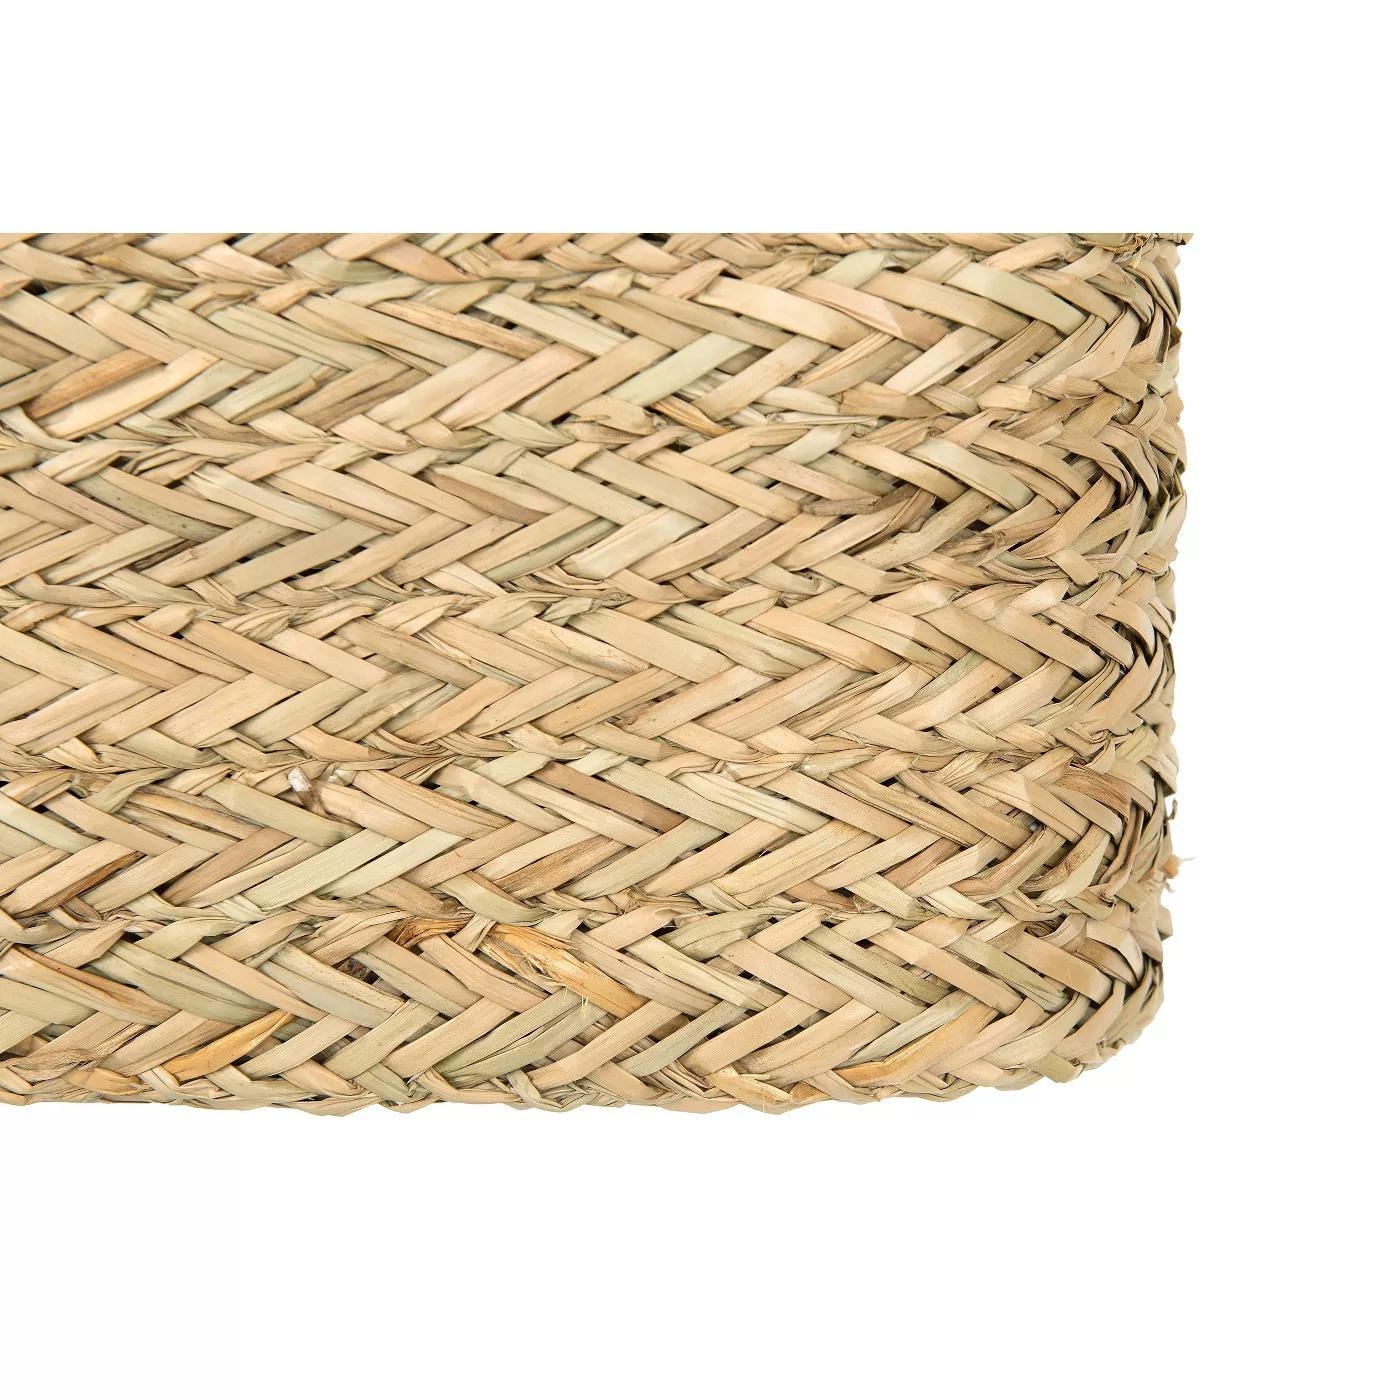 Handwoven Beige Seagrass Wall Baskets (Set of 2 Sizes) - Image 2